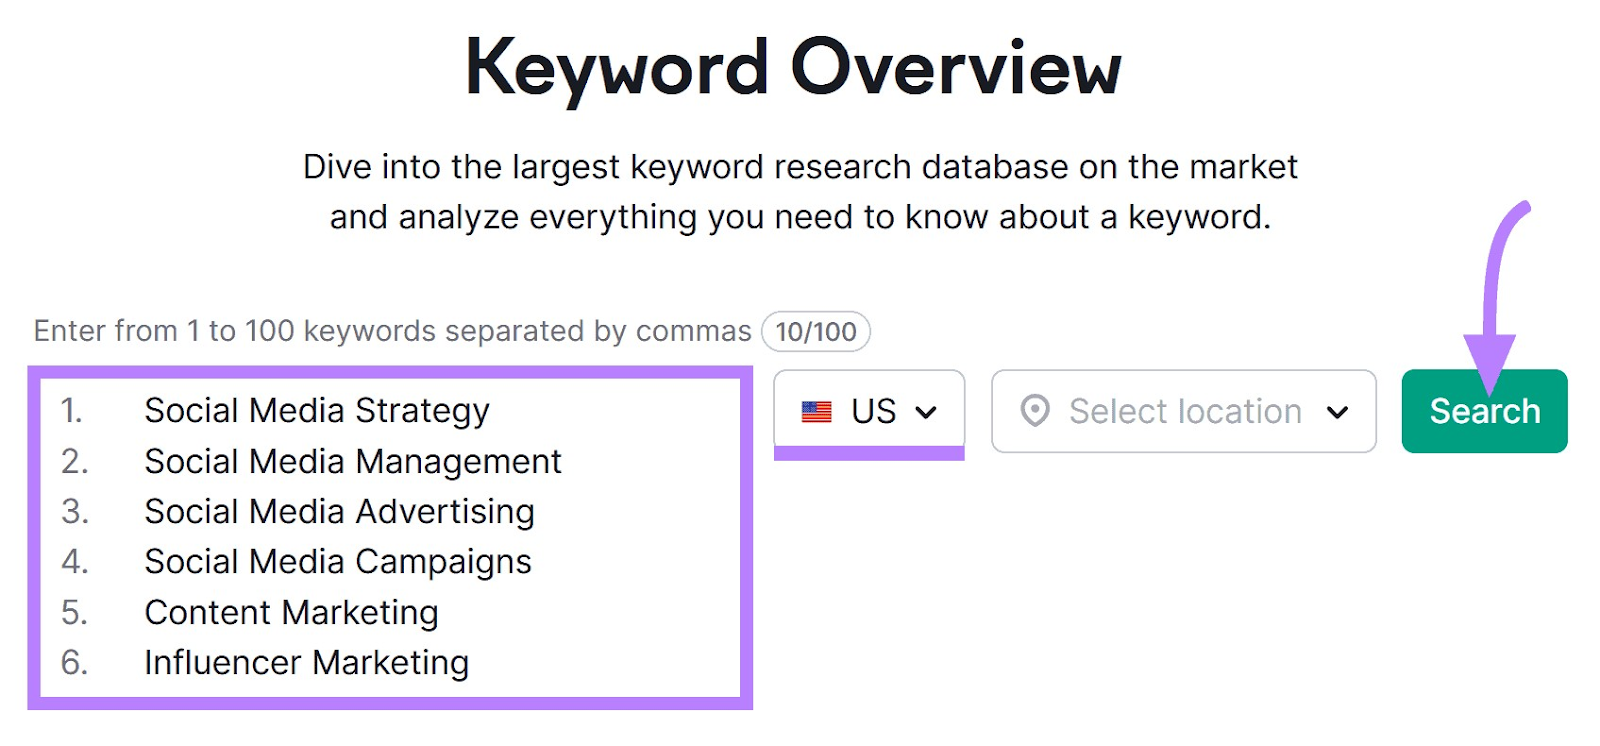 Keyword Overview search bar with six keywords entered and location set to the "US"